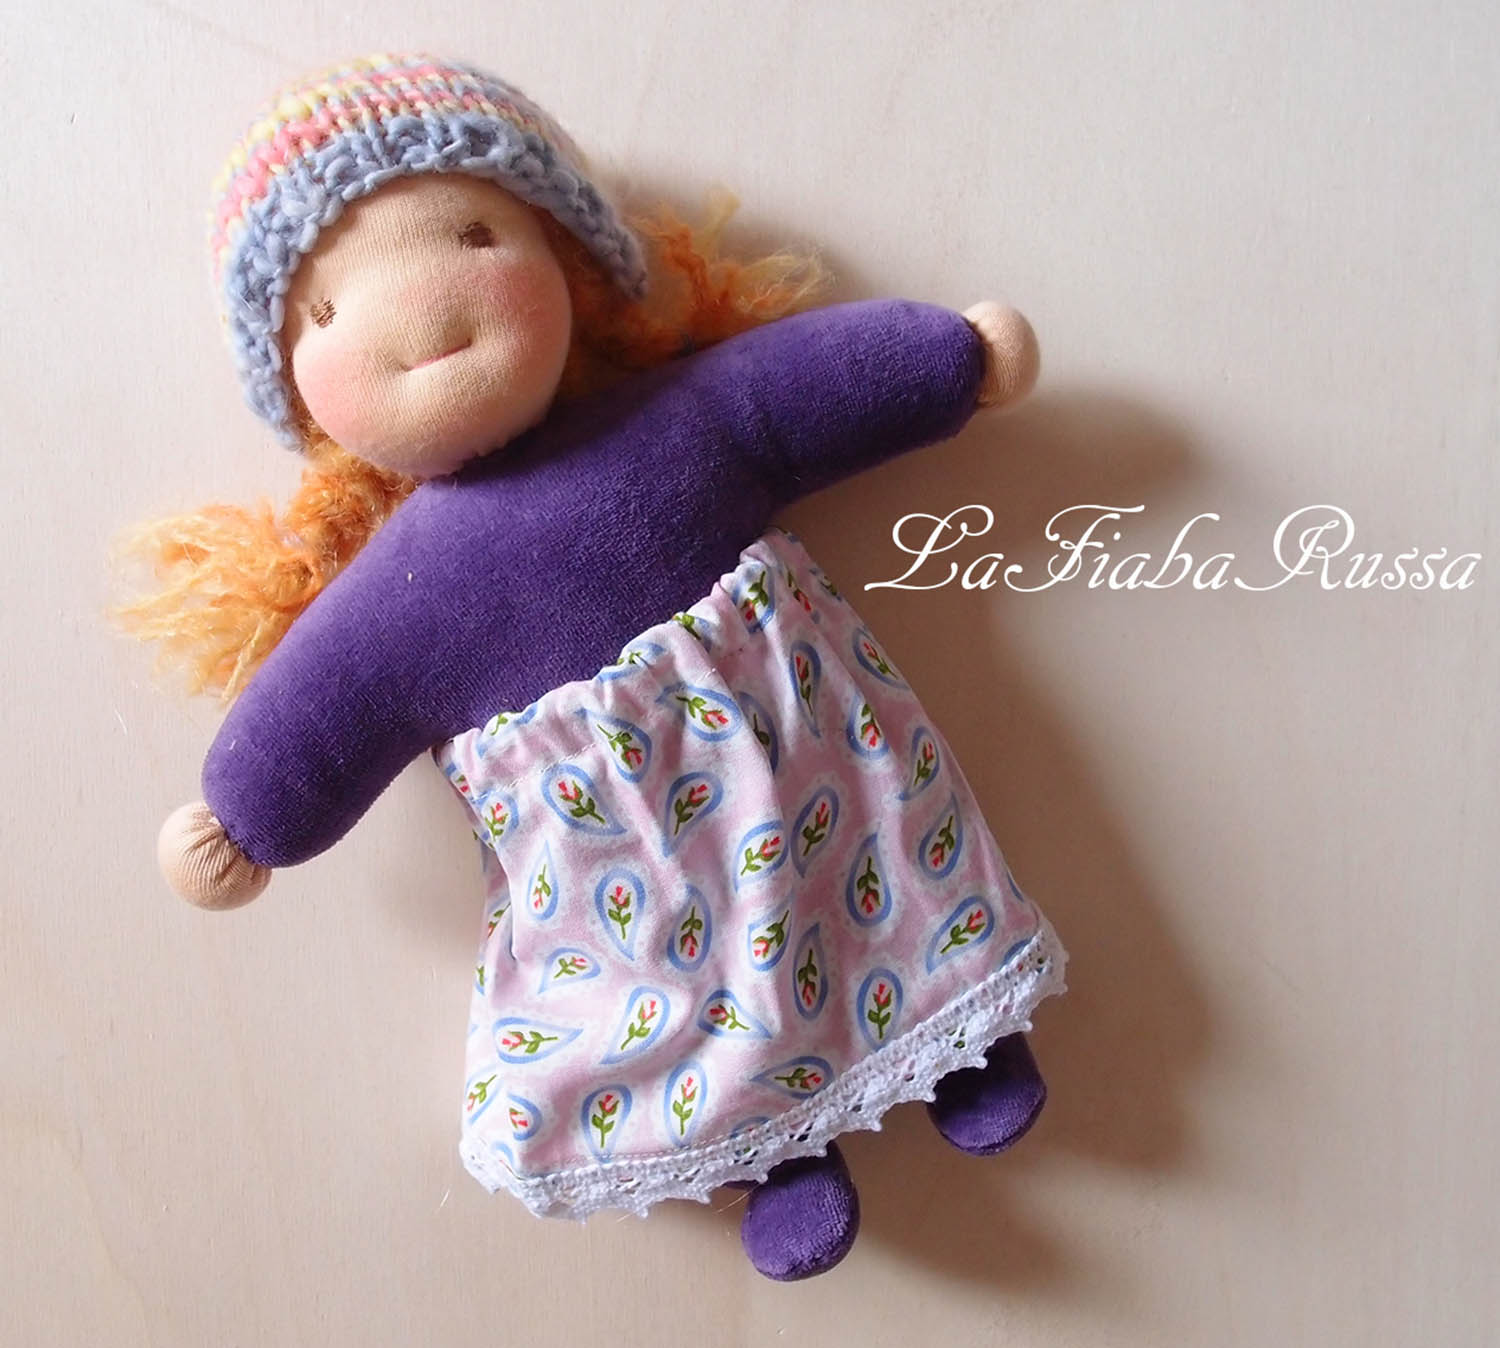 Waldorf doll 10 in waldorf inspired fabric doll gift for kids from LaFiabaRussa